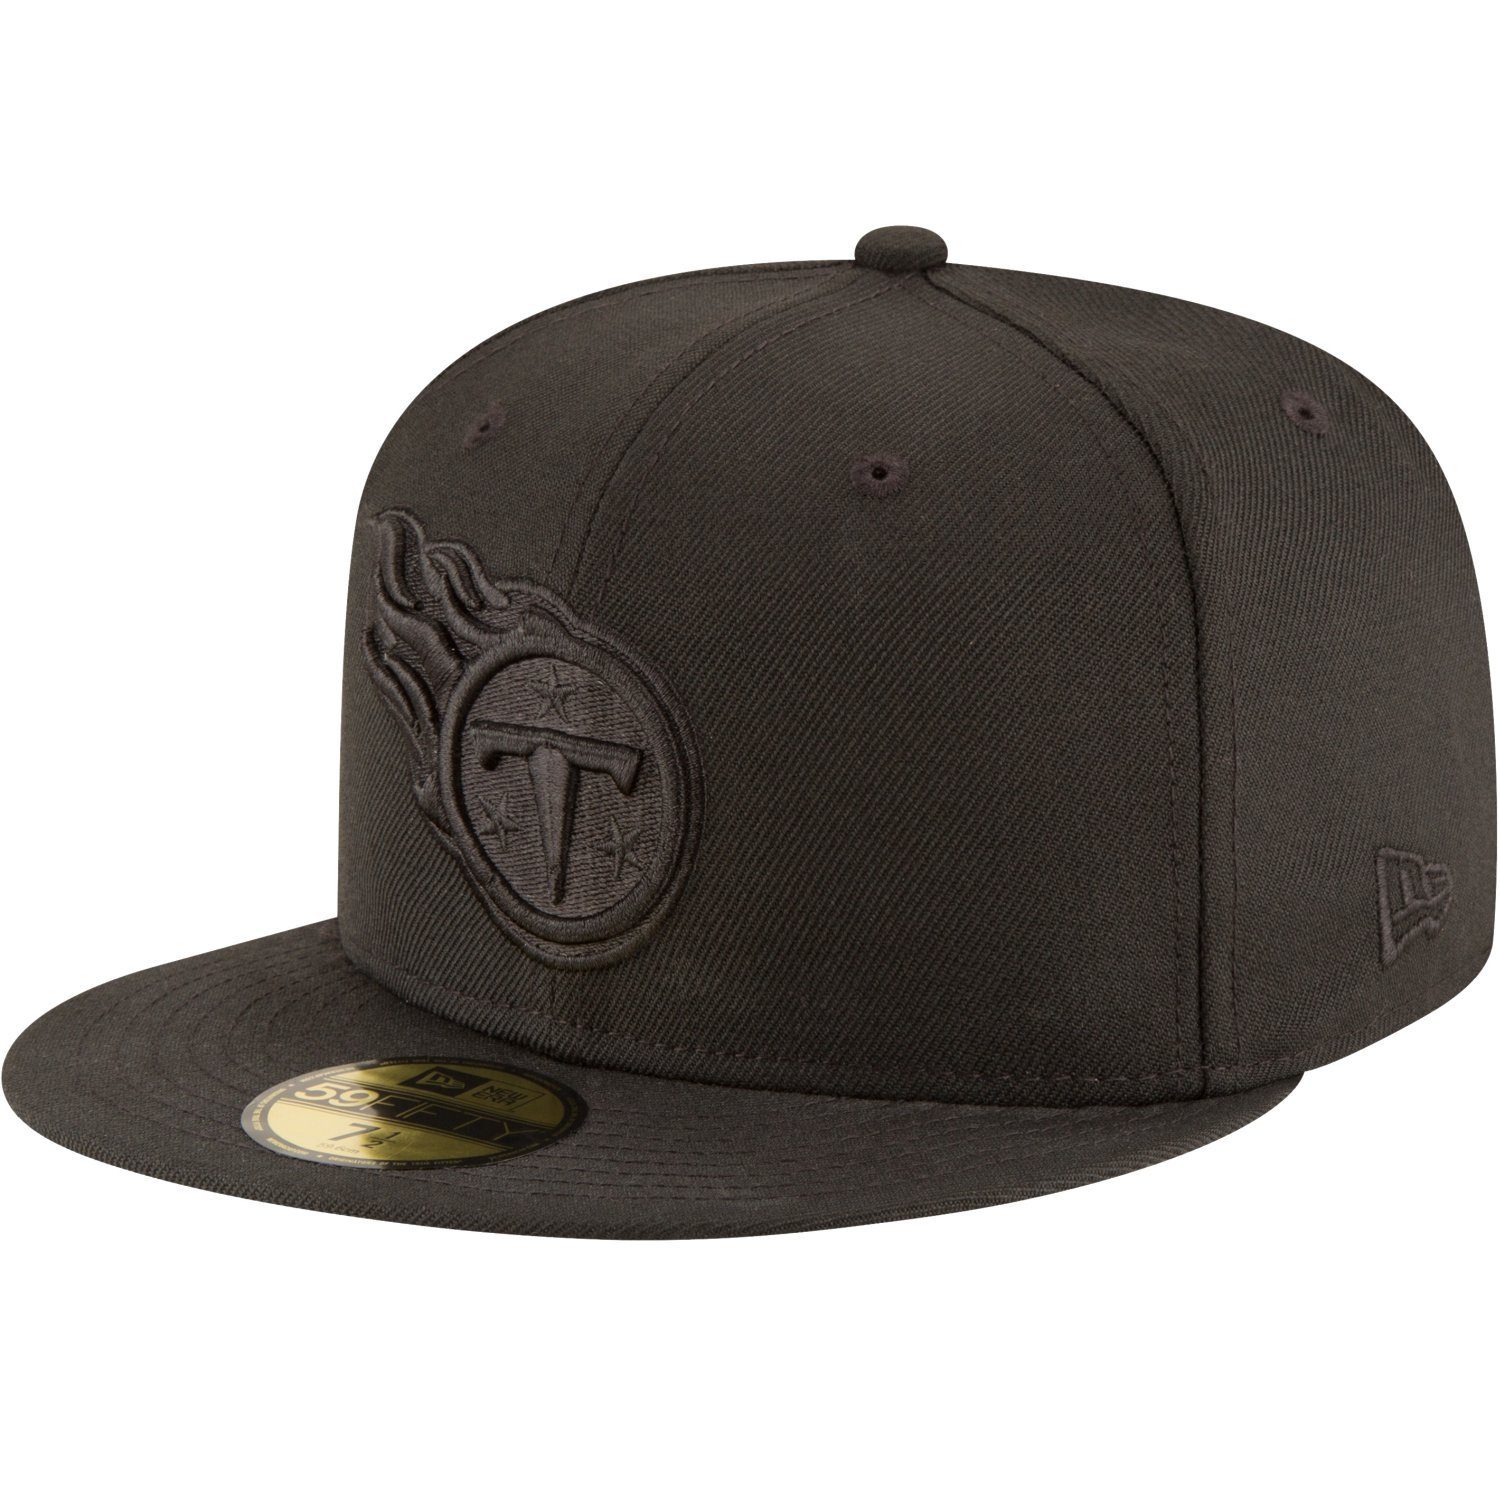 Cap 59Fifty Era Tennessee NFL New Fitted Titans